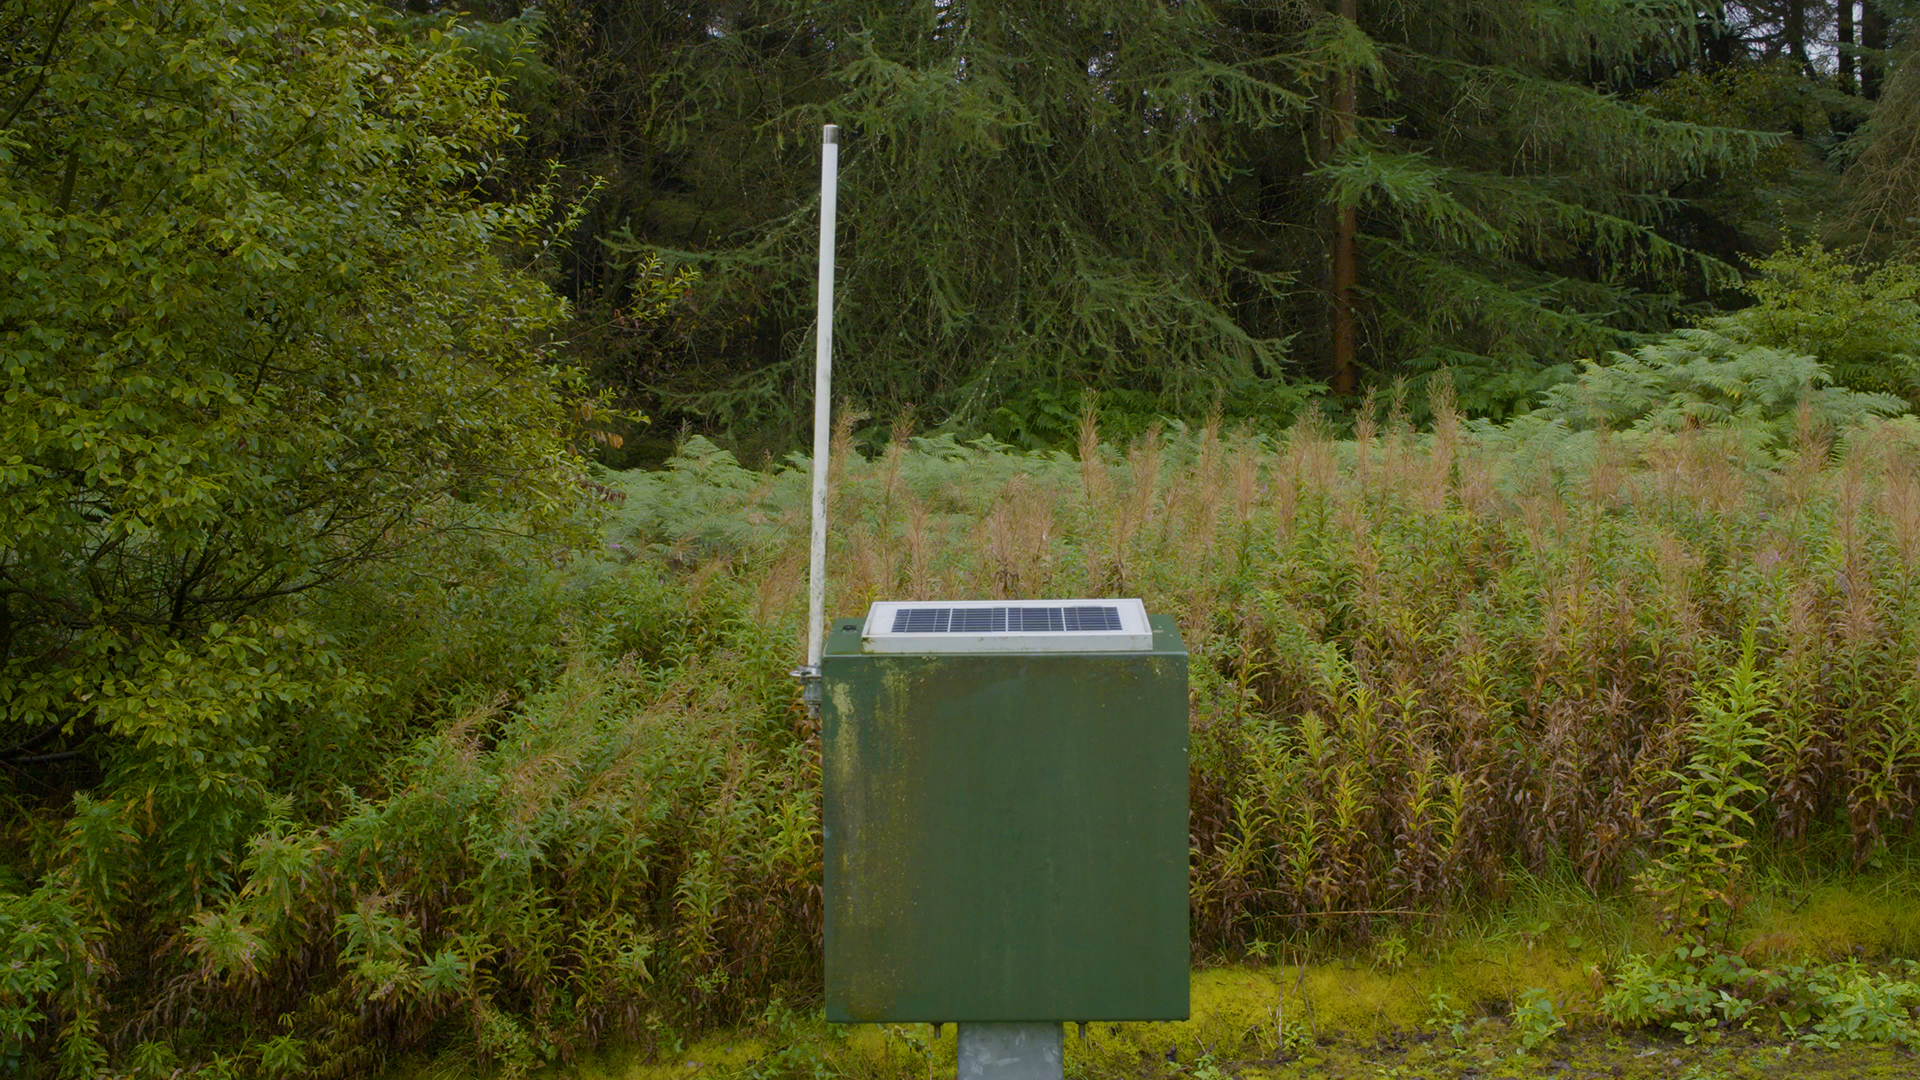 A photograph of green metal box with an aerial on the left hand side info front of bushes and trees.